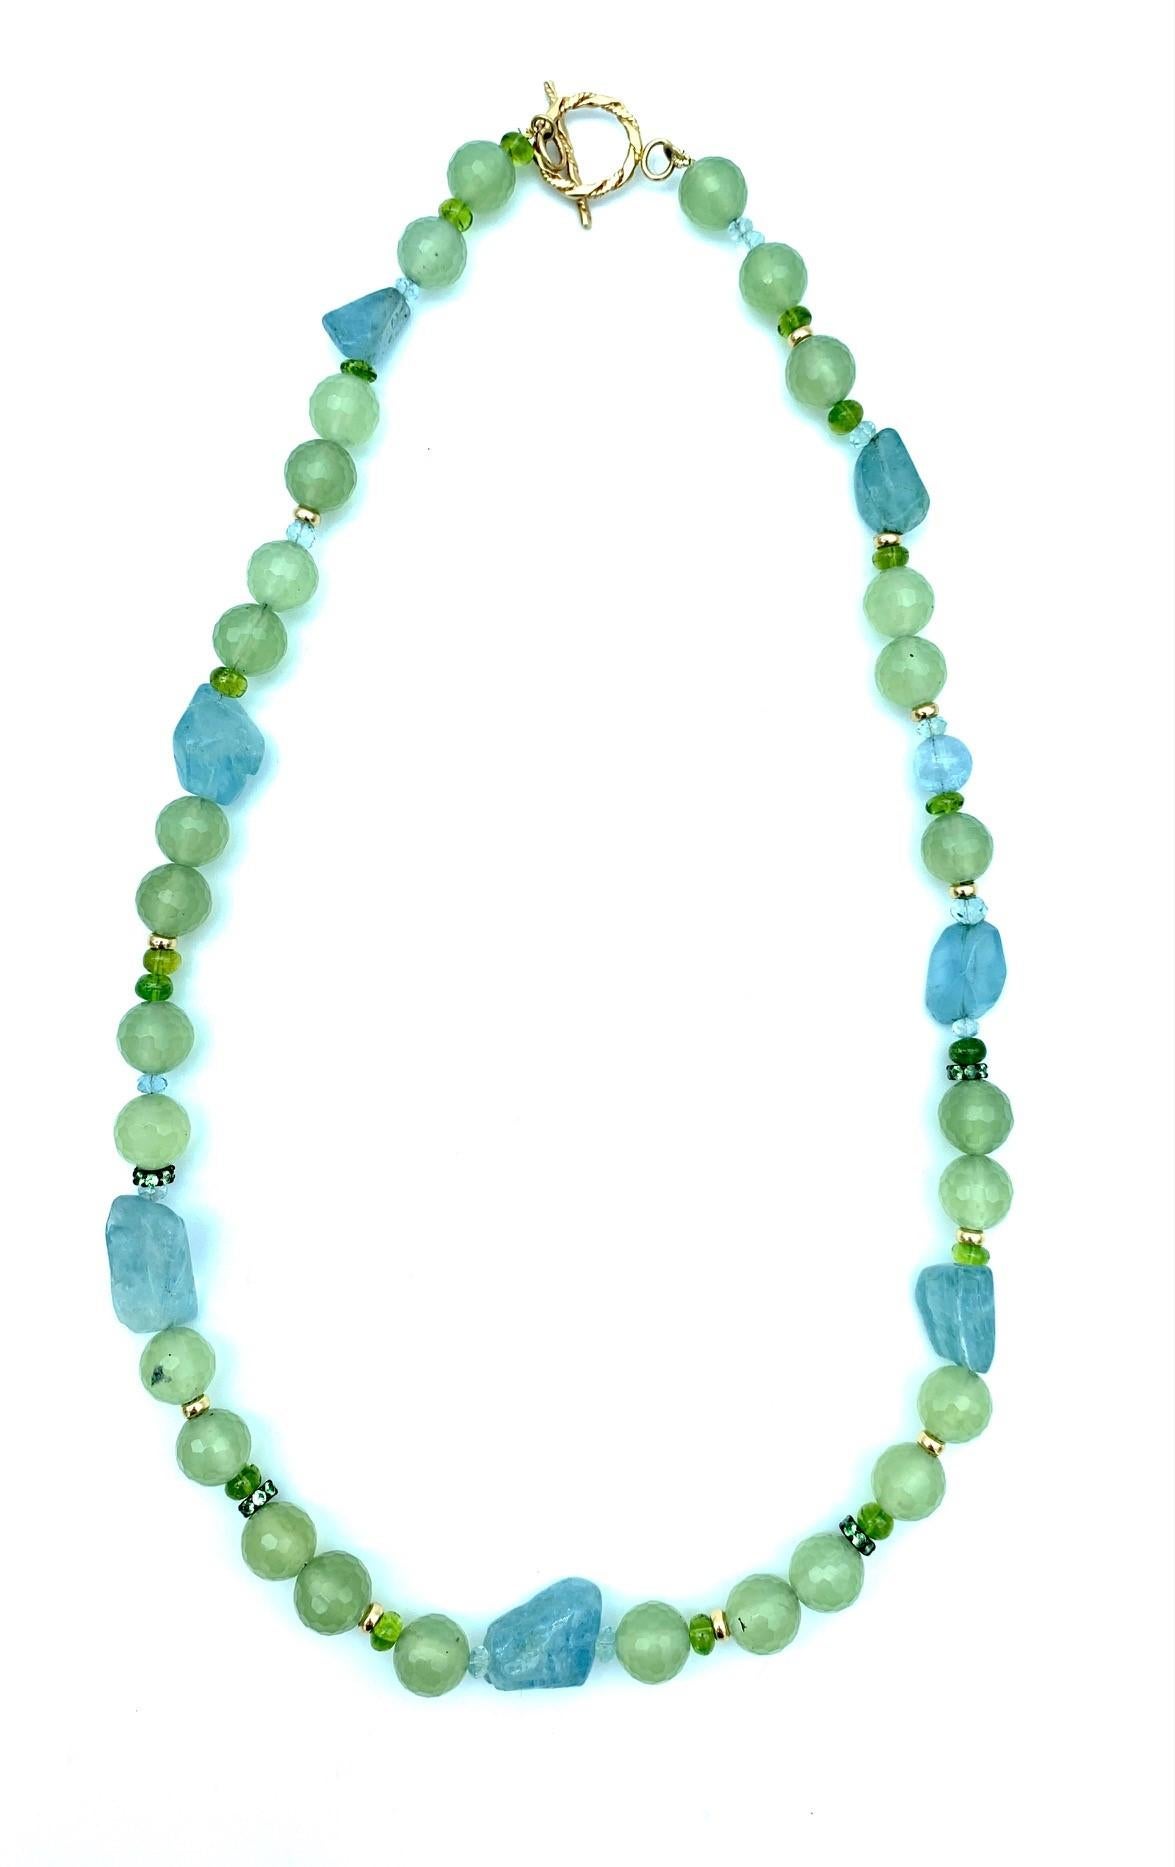 Aquamarine, Peridot, Phrenite and Tsavorite Beaded Necklace with Gold Accents In New Condition For Sale In Los Angeles, CA